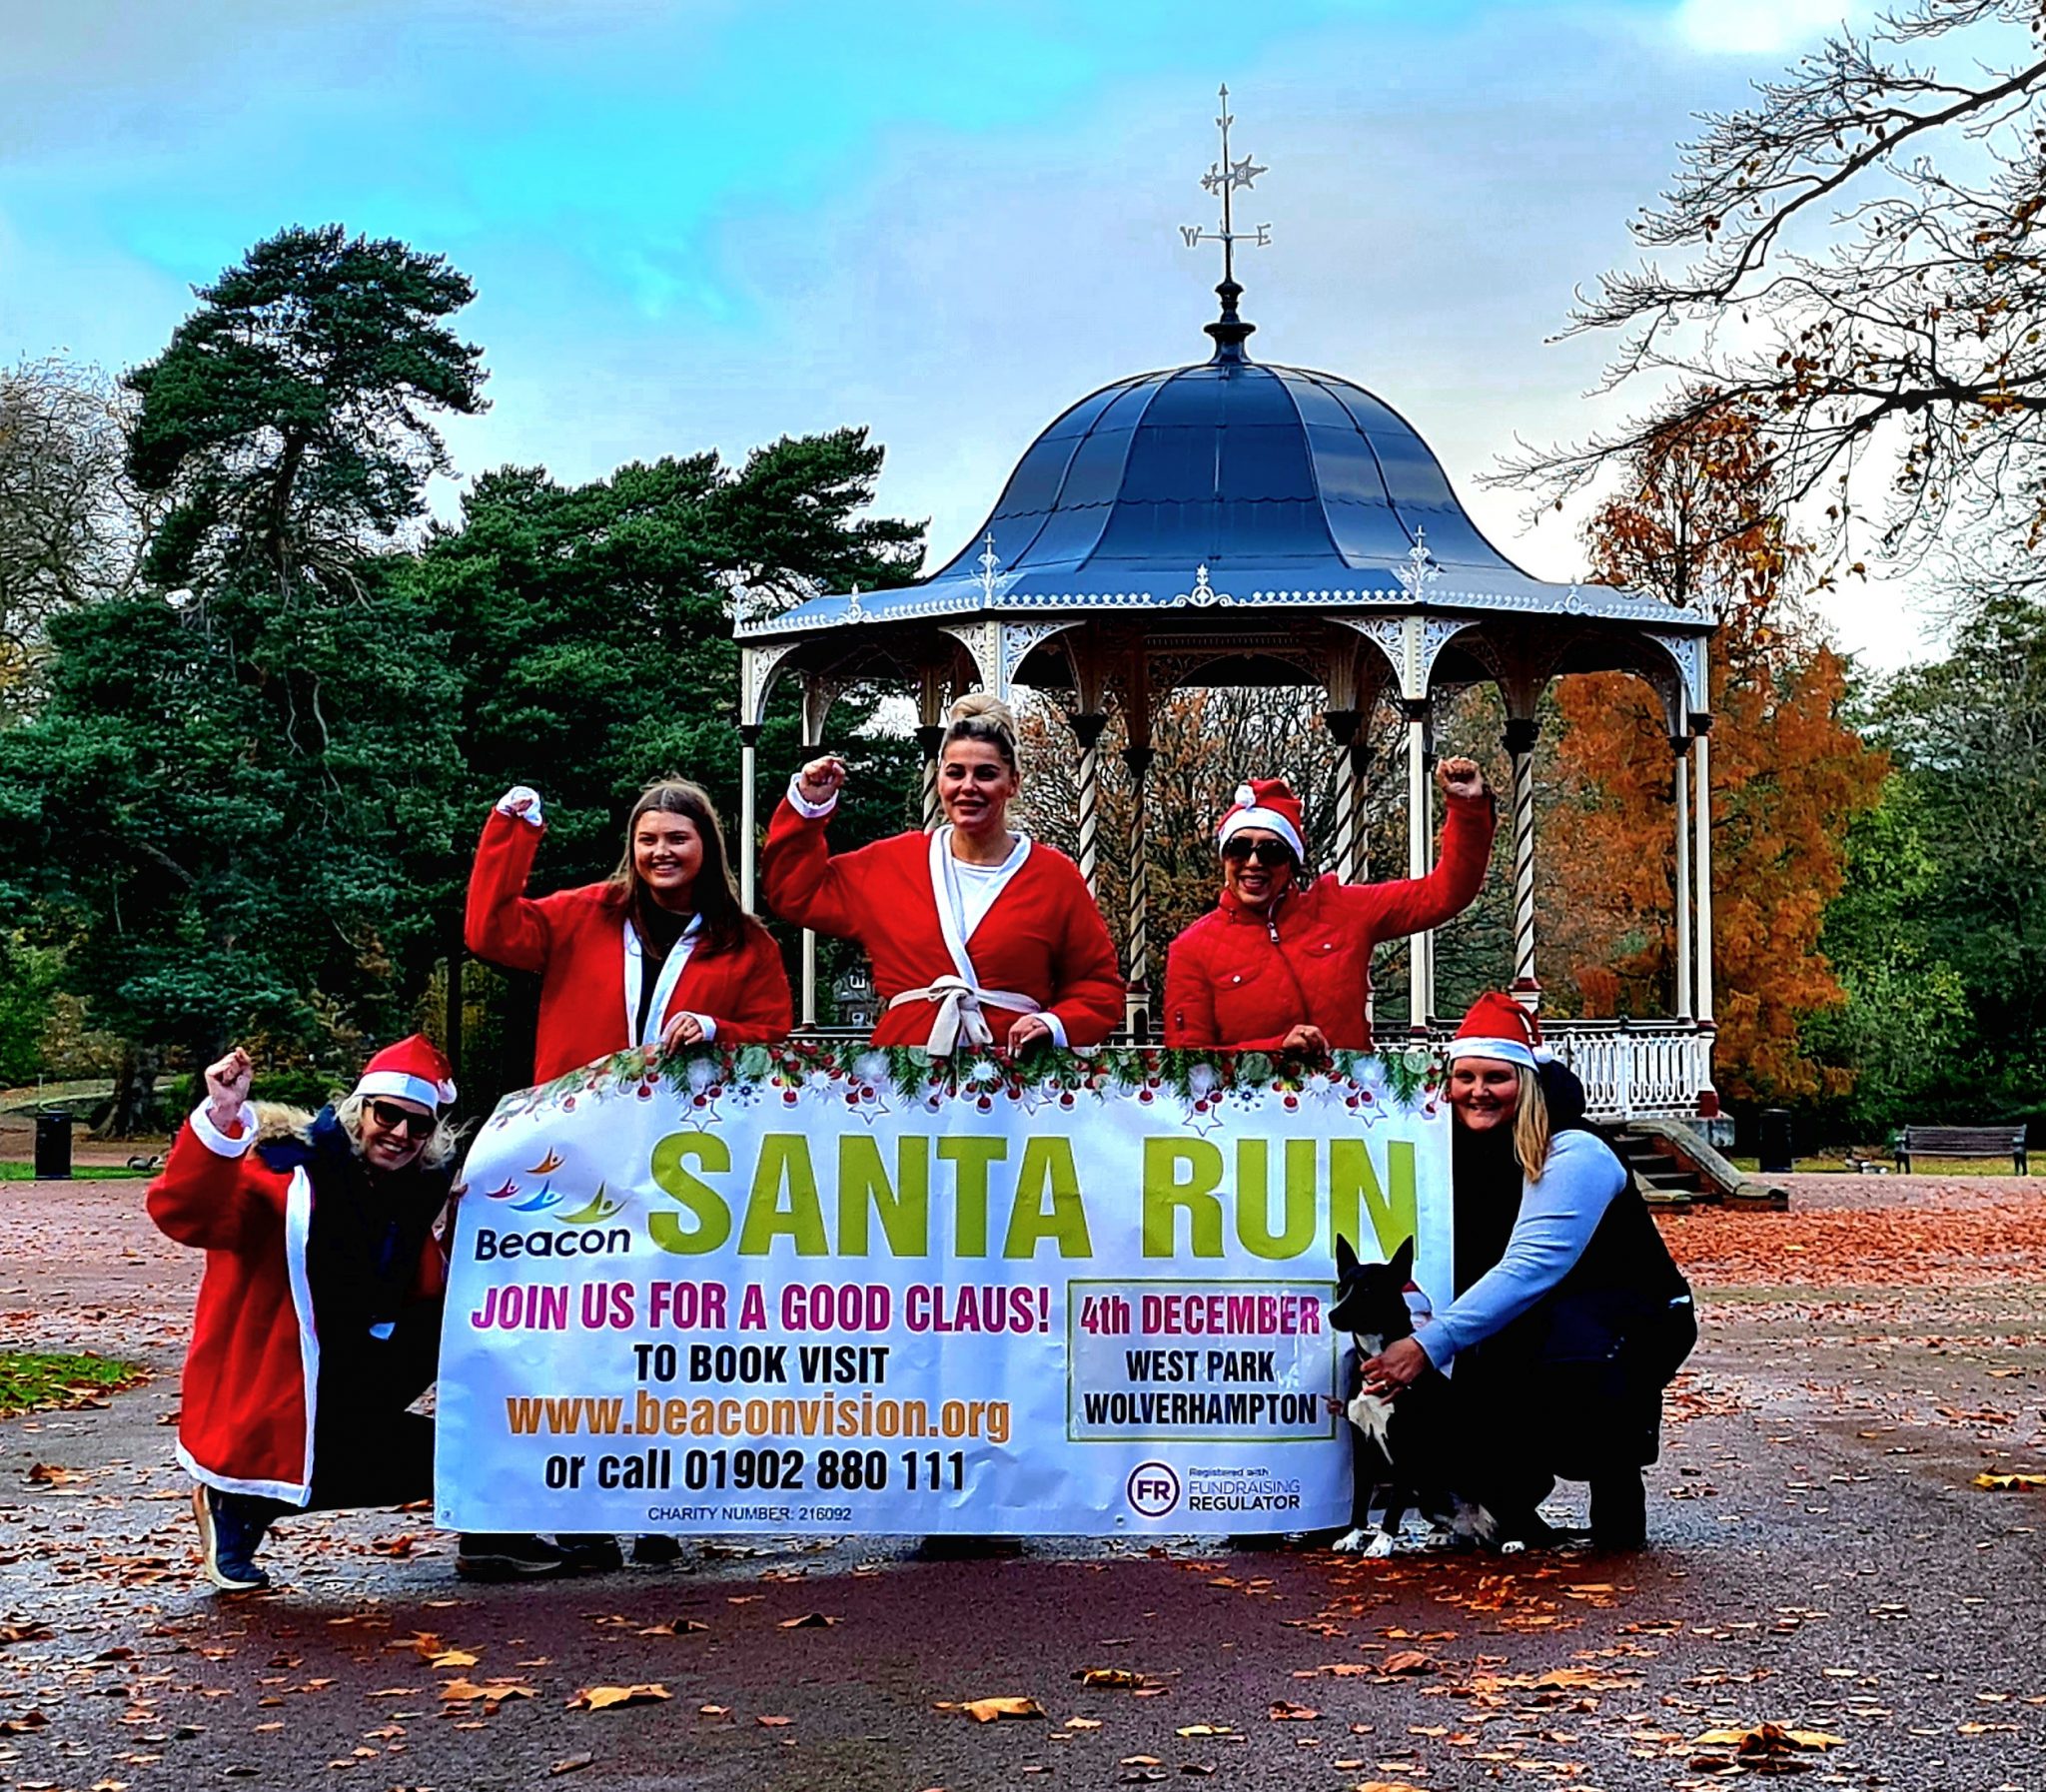 There are five women on this picture and a dog. They are all dressed in Santa outfits and they are holding a large banner promoting our Santa Run. They are in West Park and behind them is a bandstand.